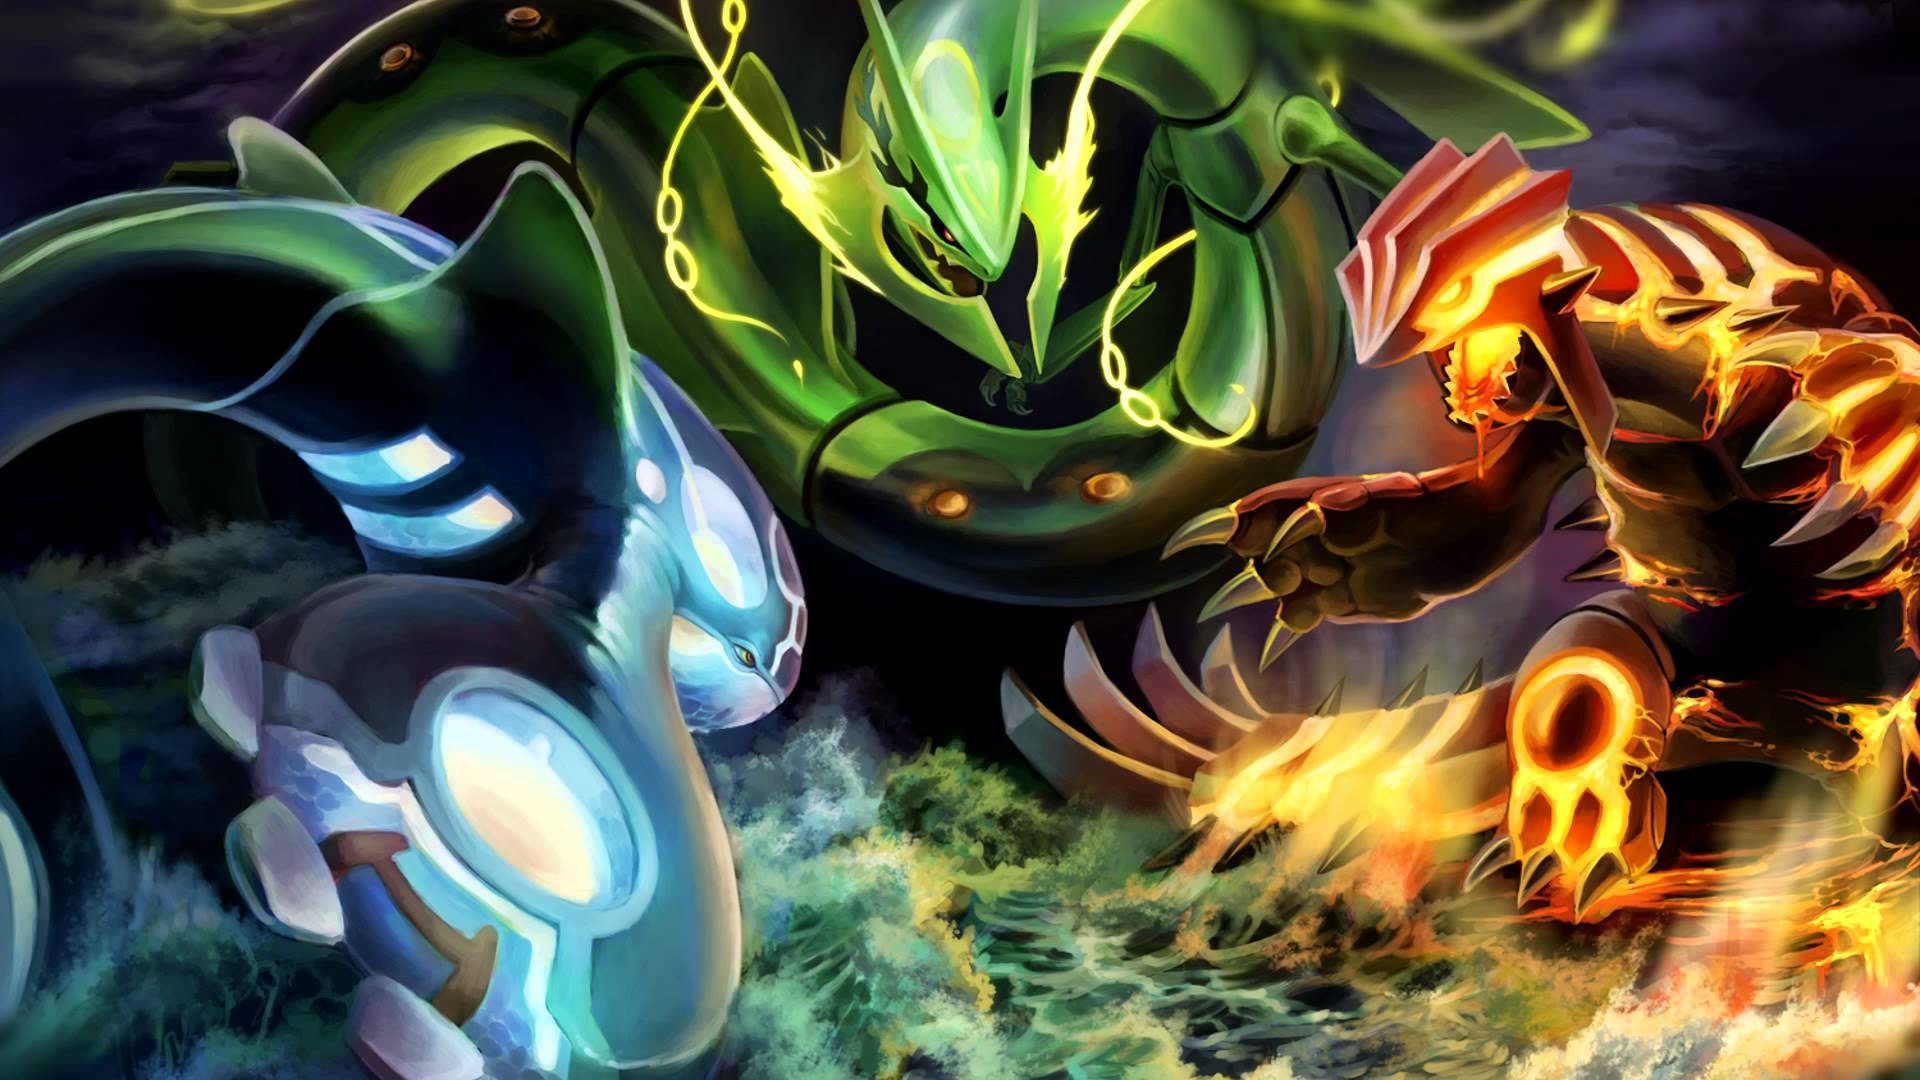 1920x1080 Pokemon Legendary Wallpaper For Android Is Cool Wallpapers